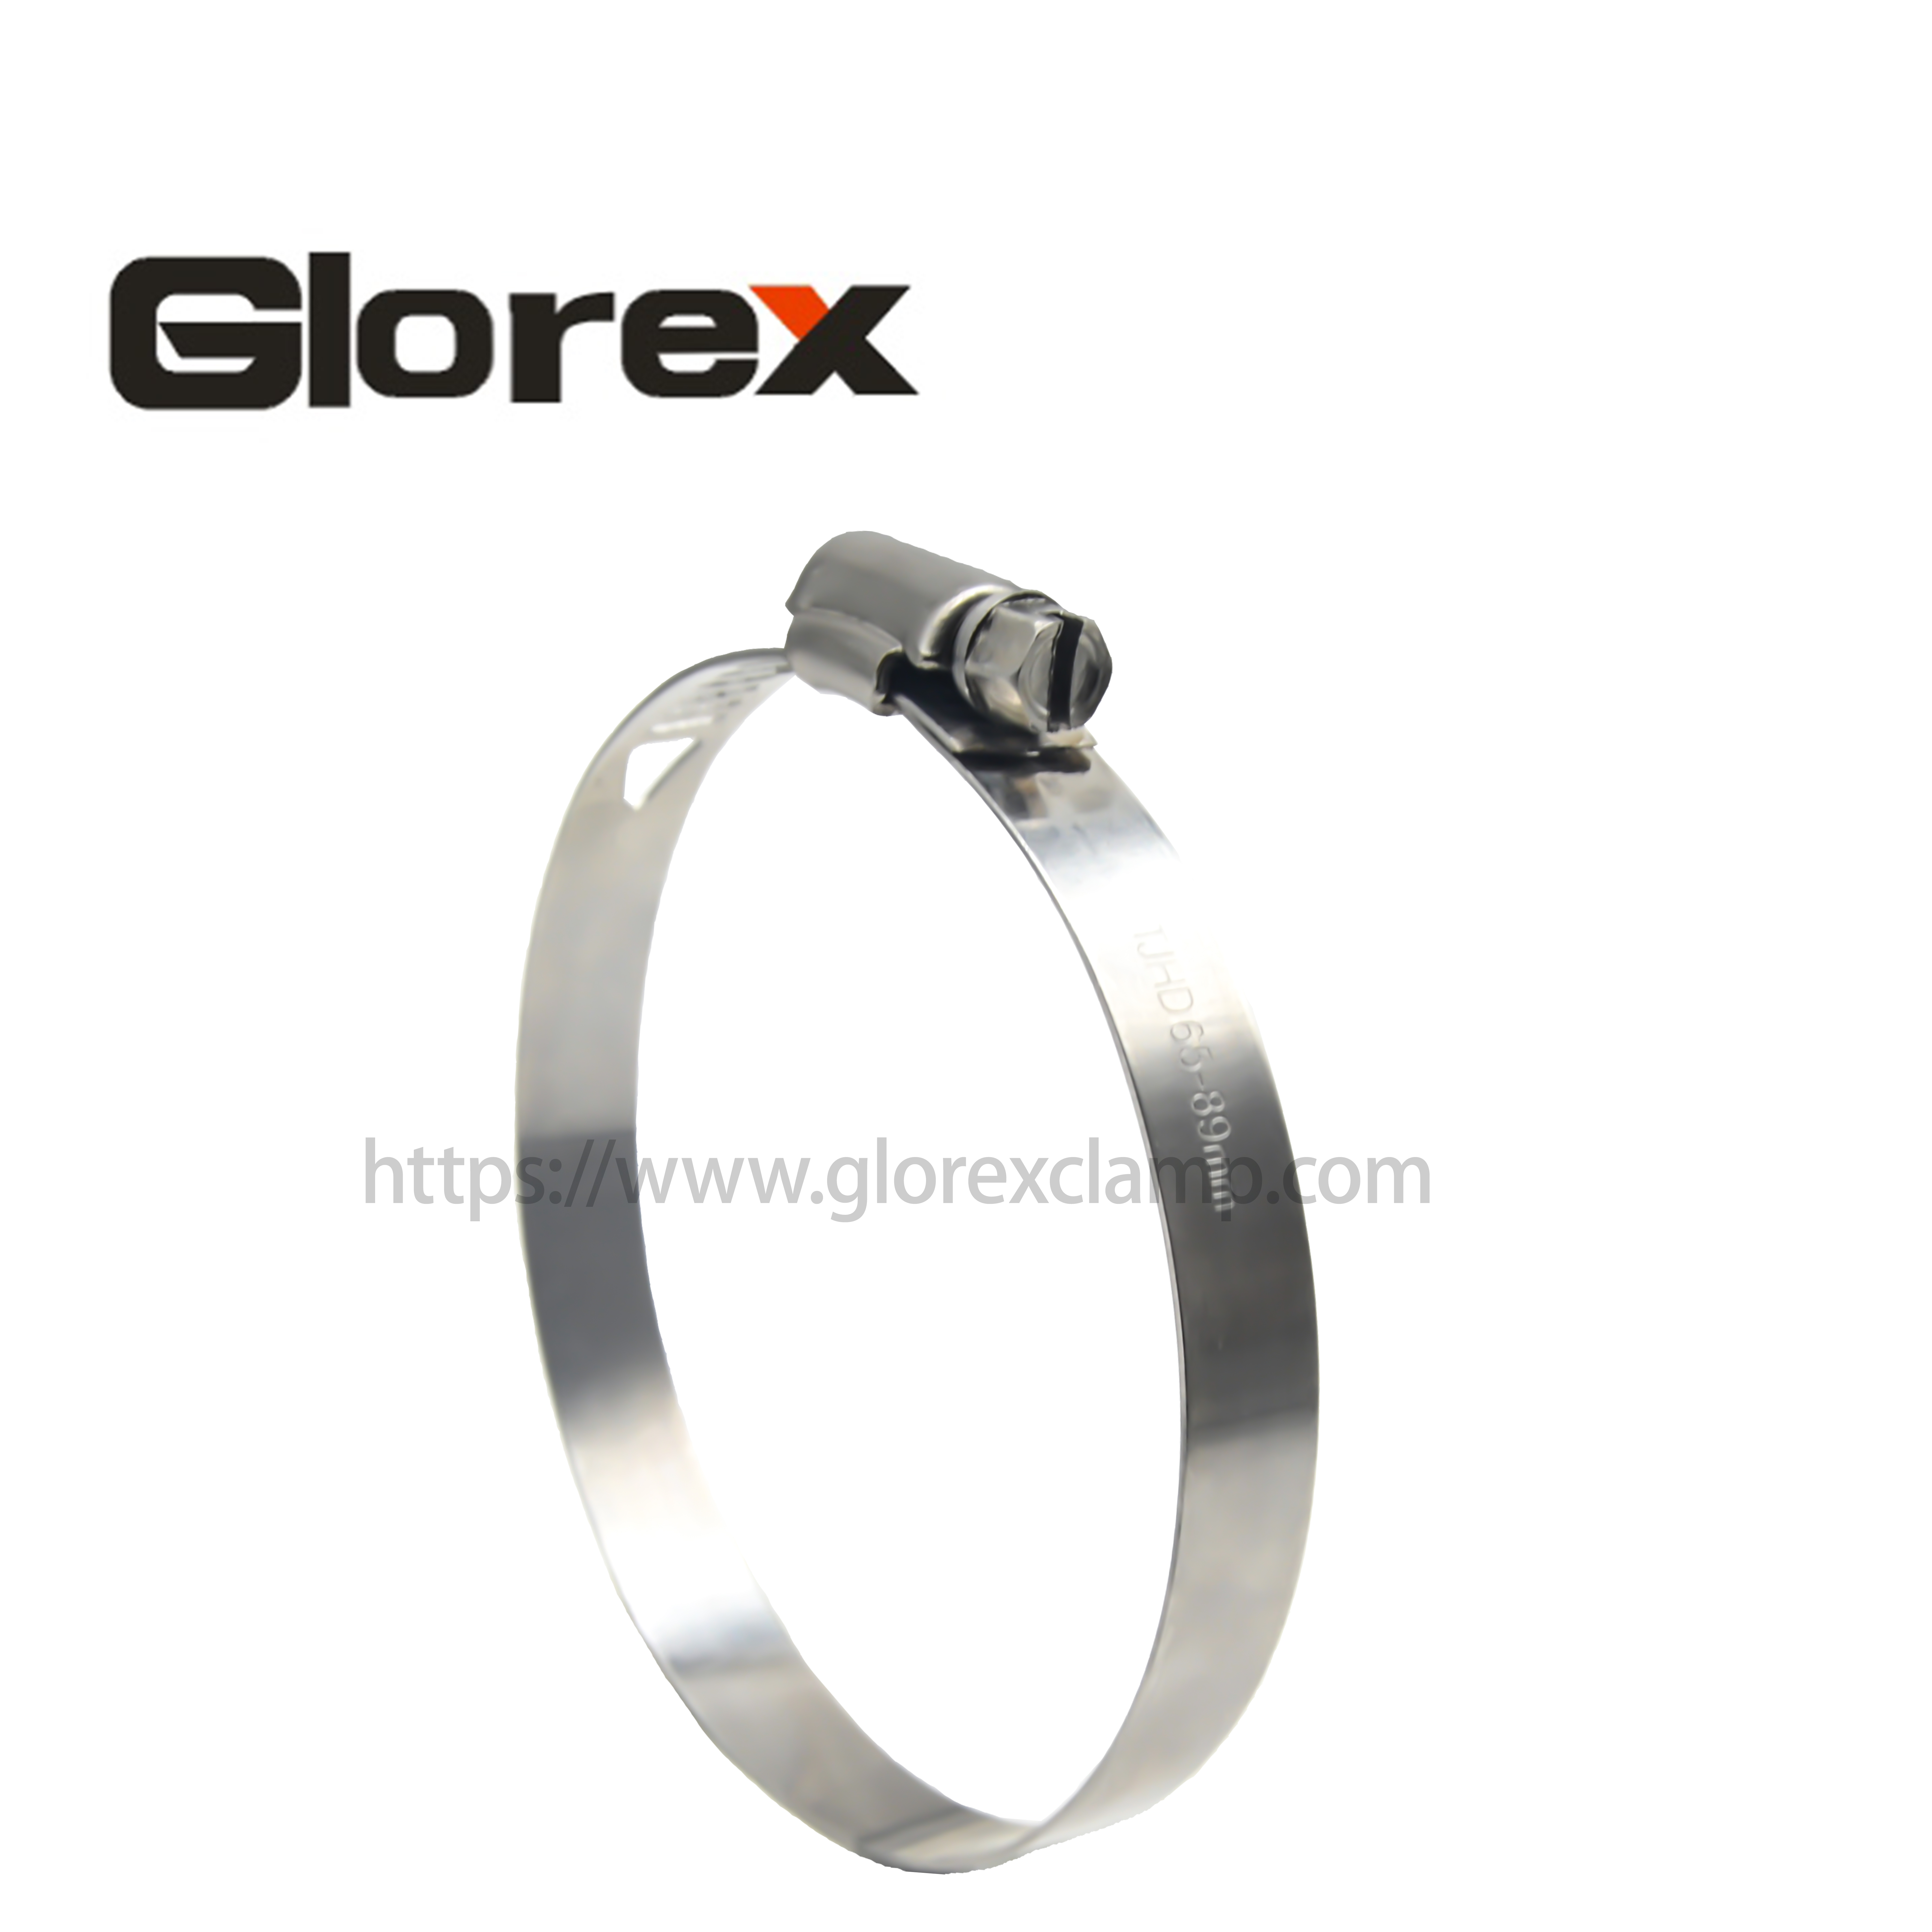 High reputation Hose Clamp with No Rubber - 10mm American type hose clmp – Glorex